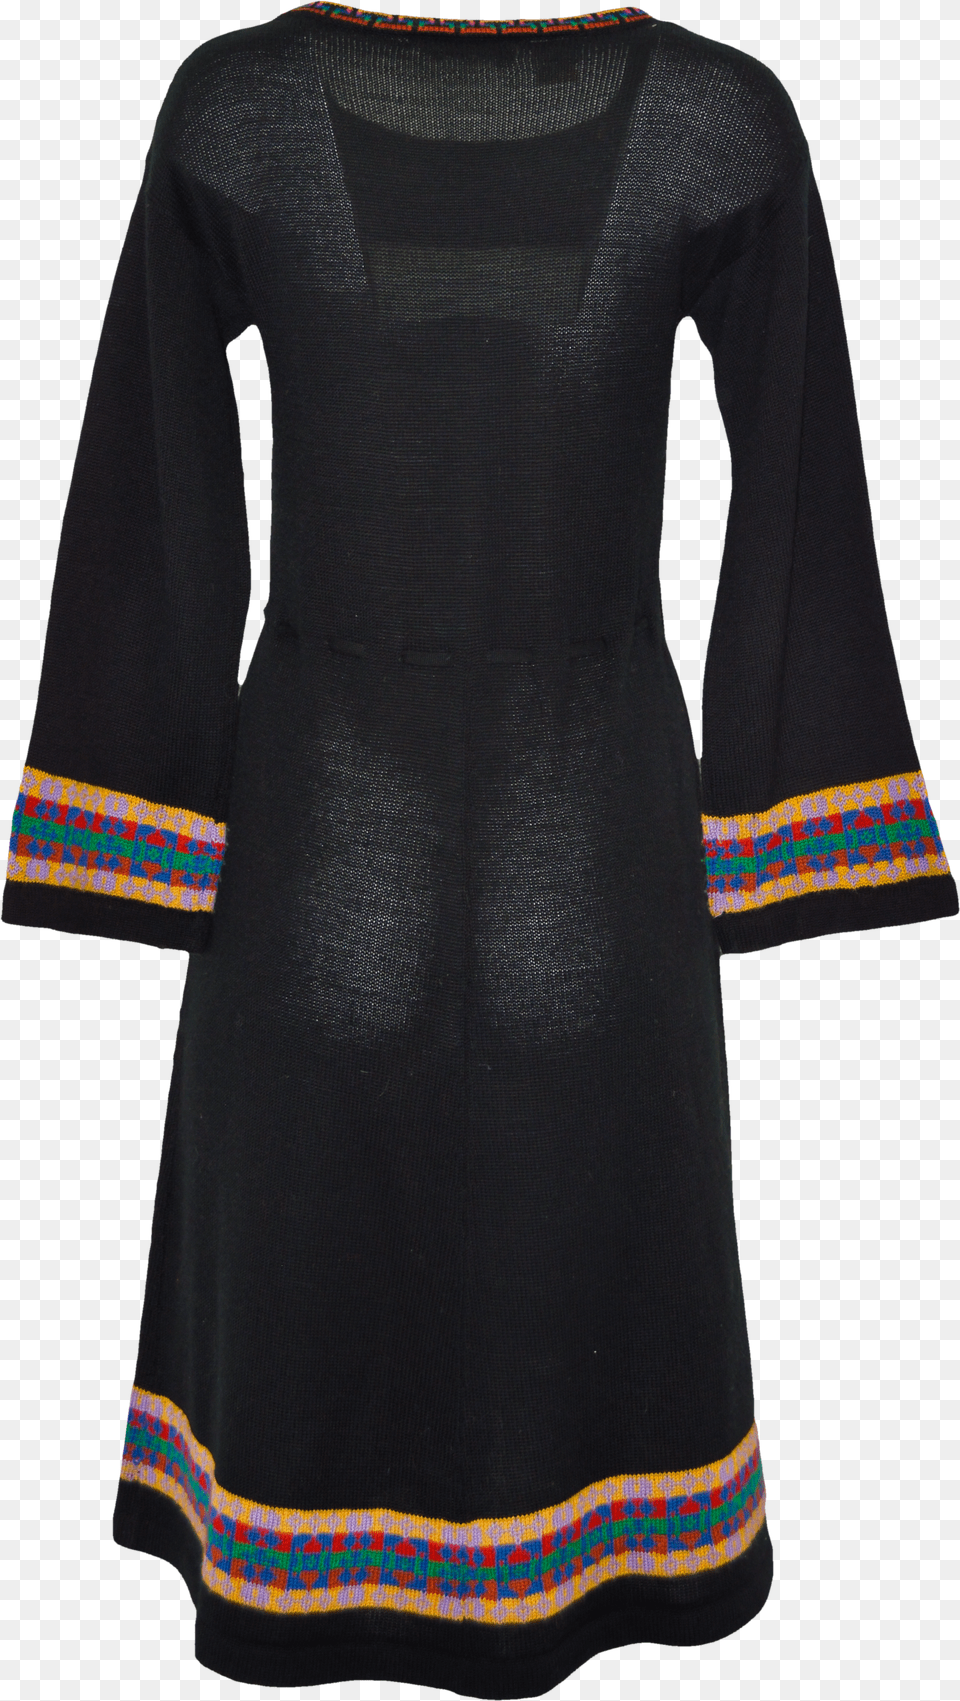 Black Knit Dress With Colorful Tassels By Milanse Dress Day Dress Free Png